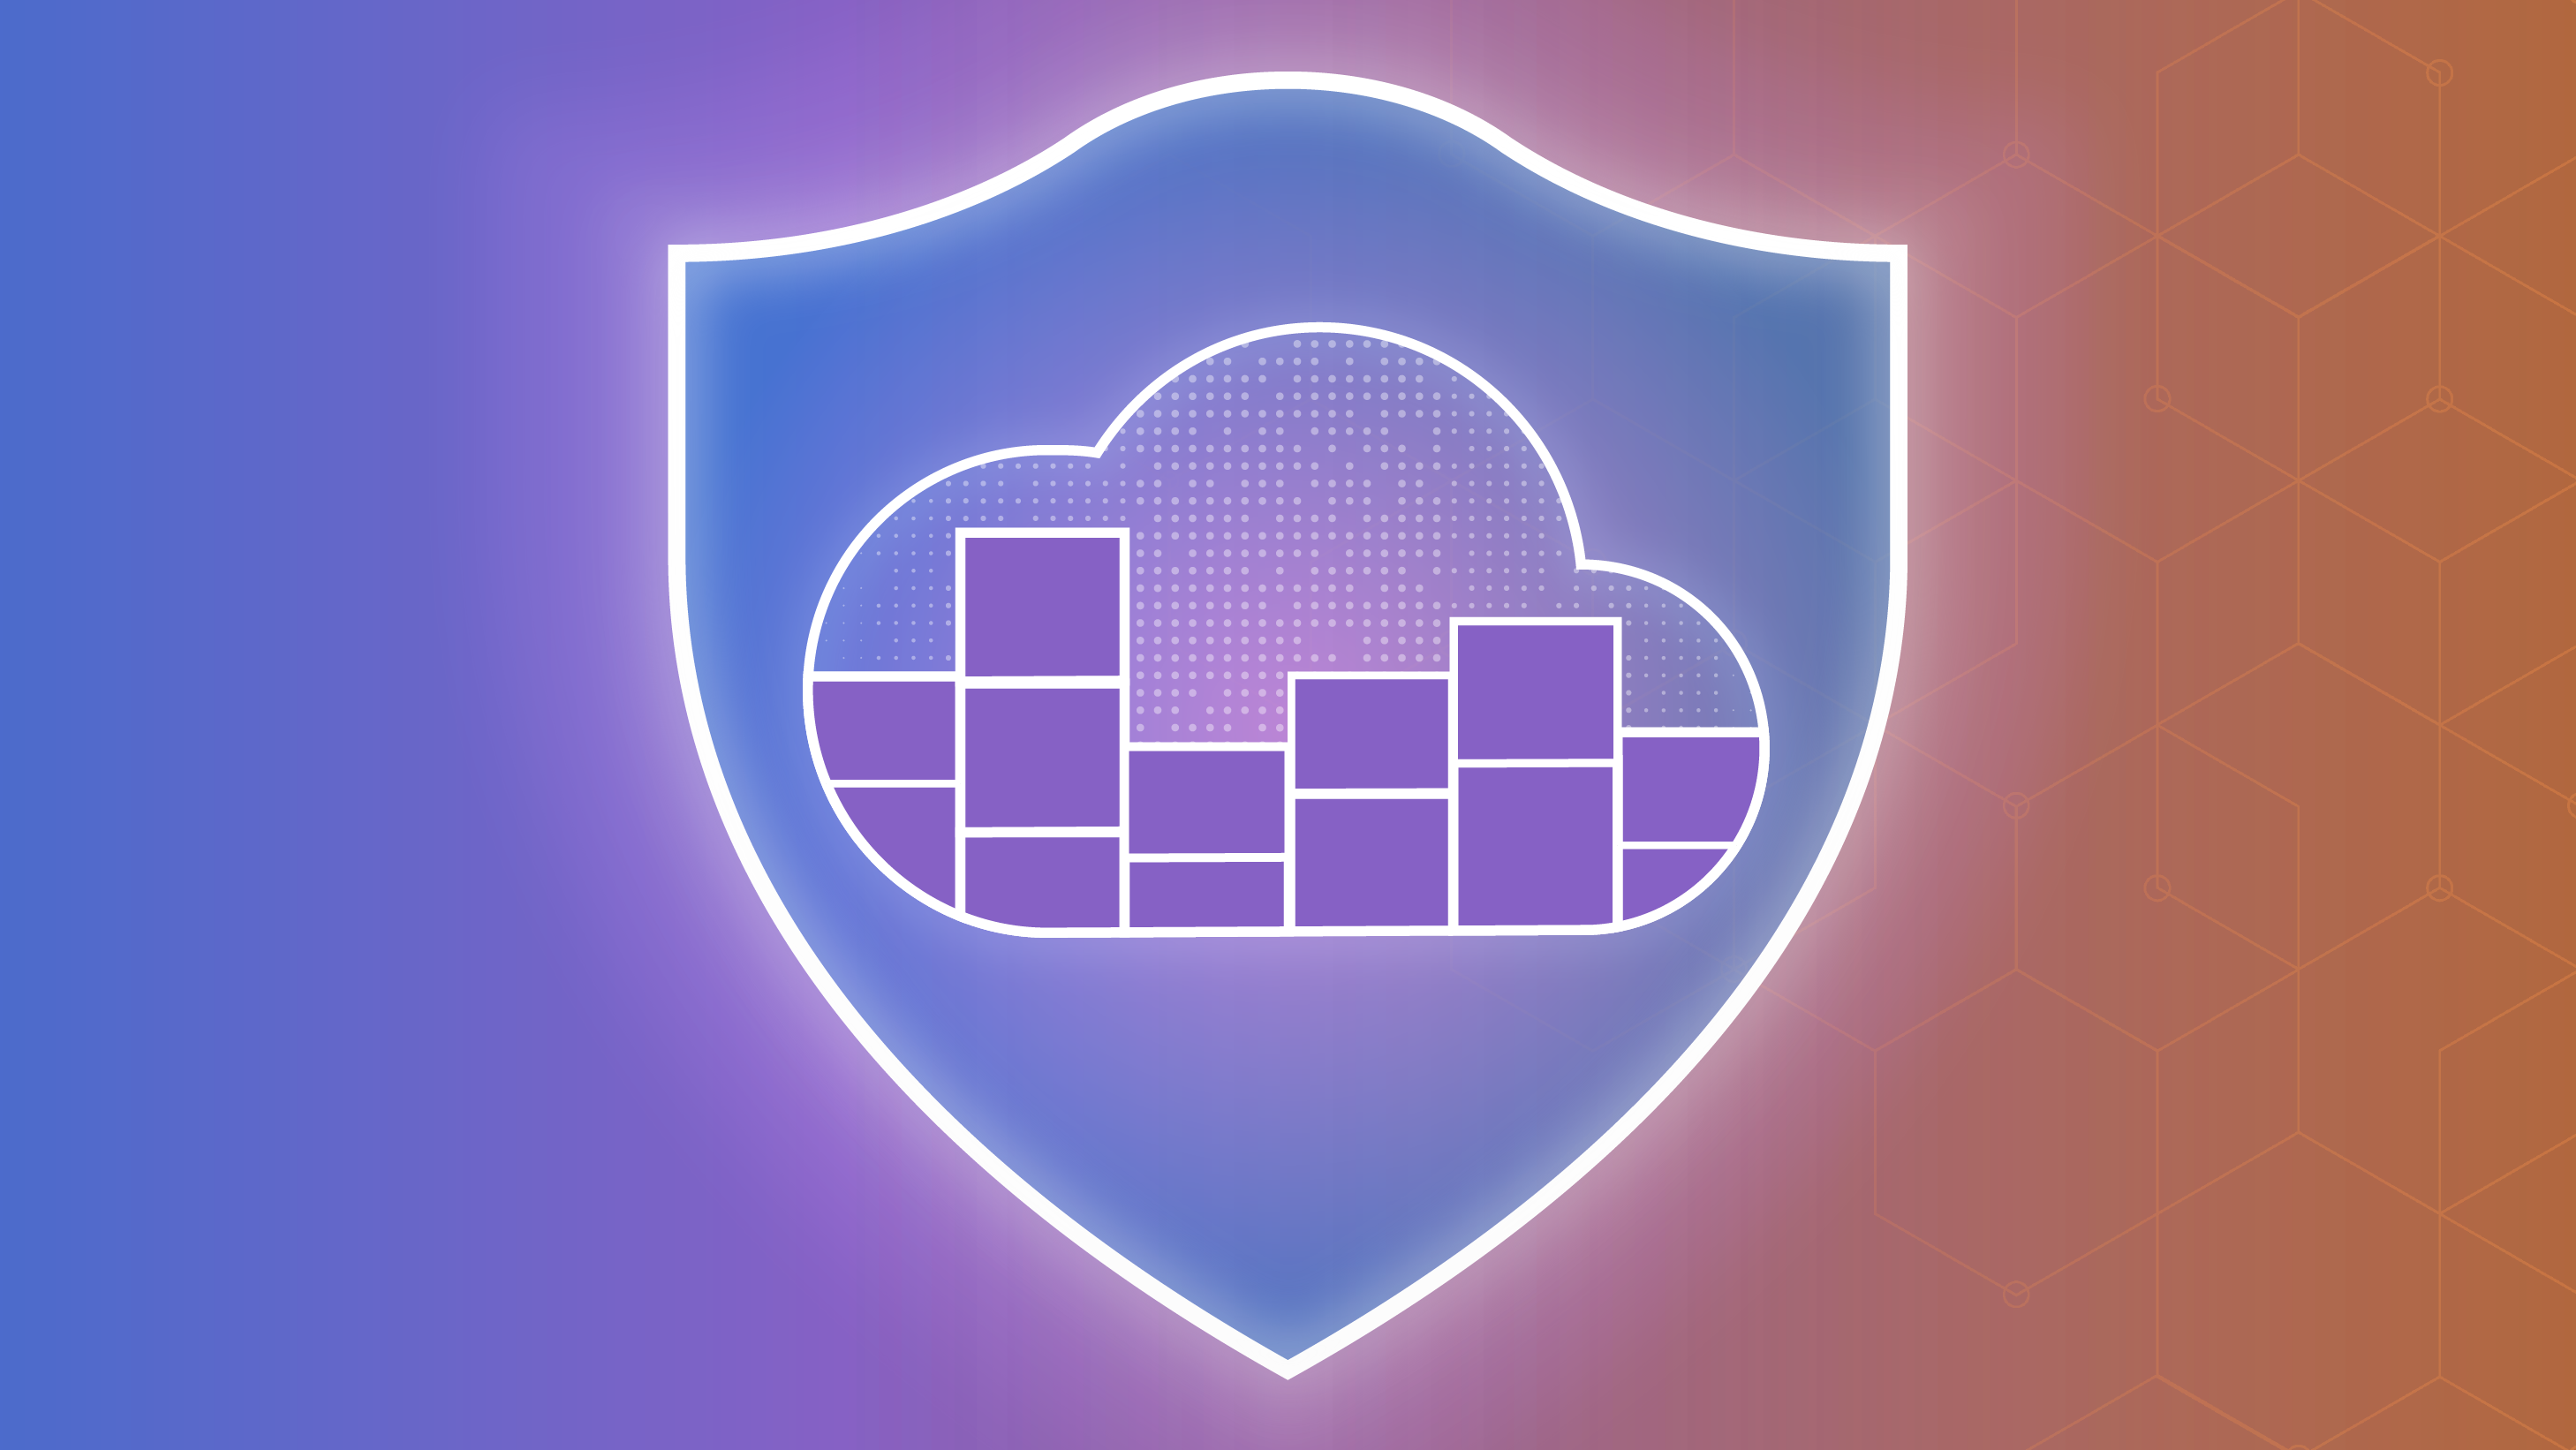 A cloud outline within a security shield over top a blue to orange color gradient background.